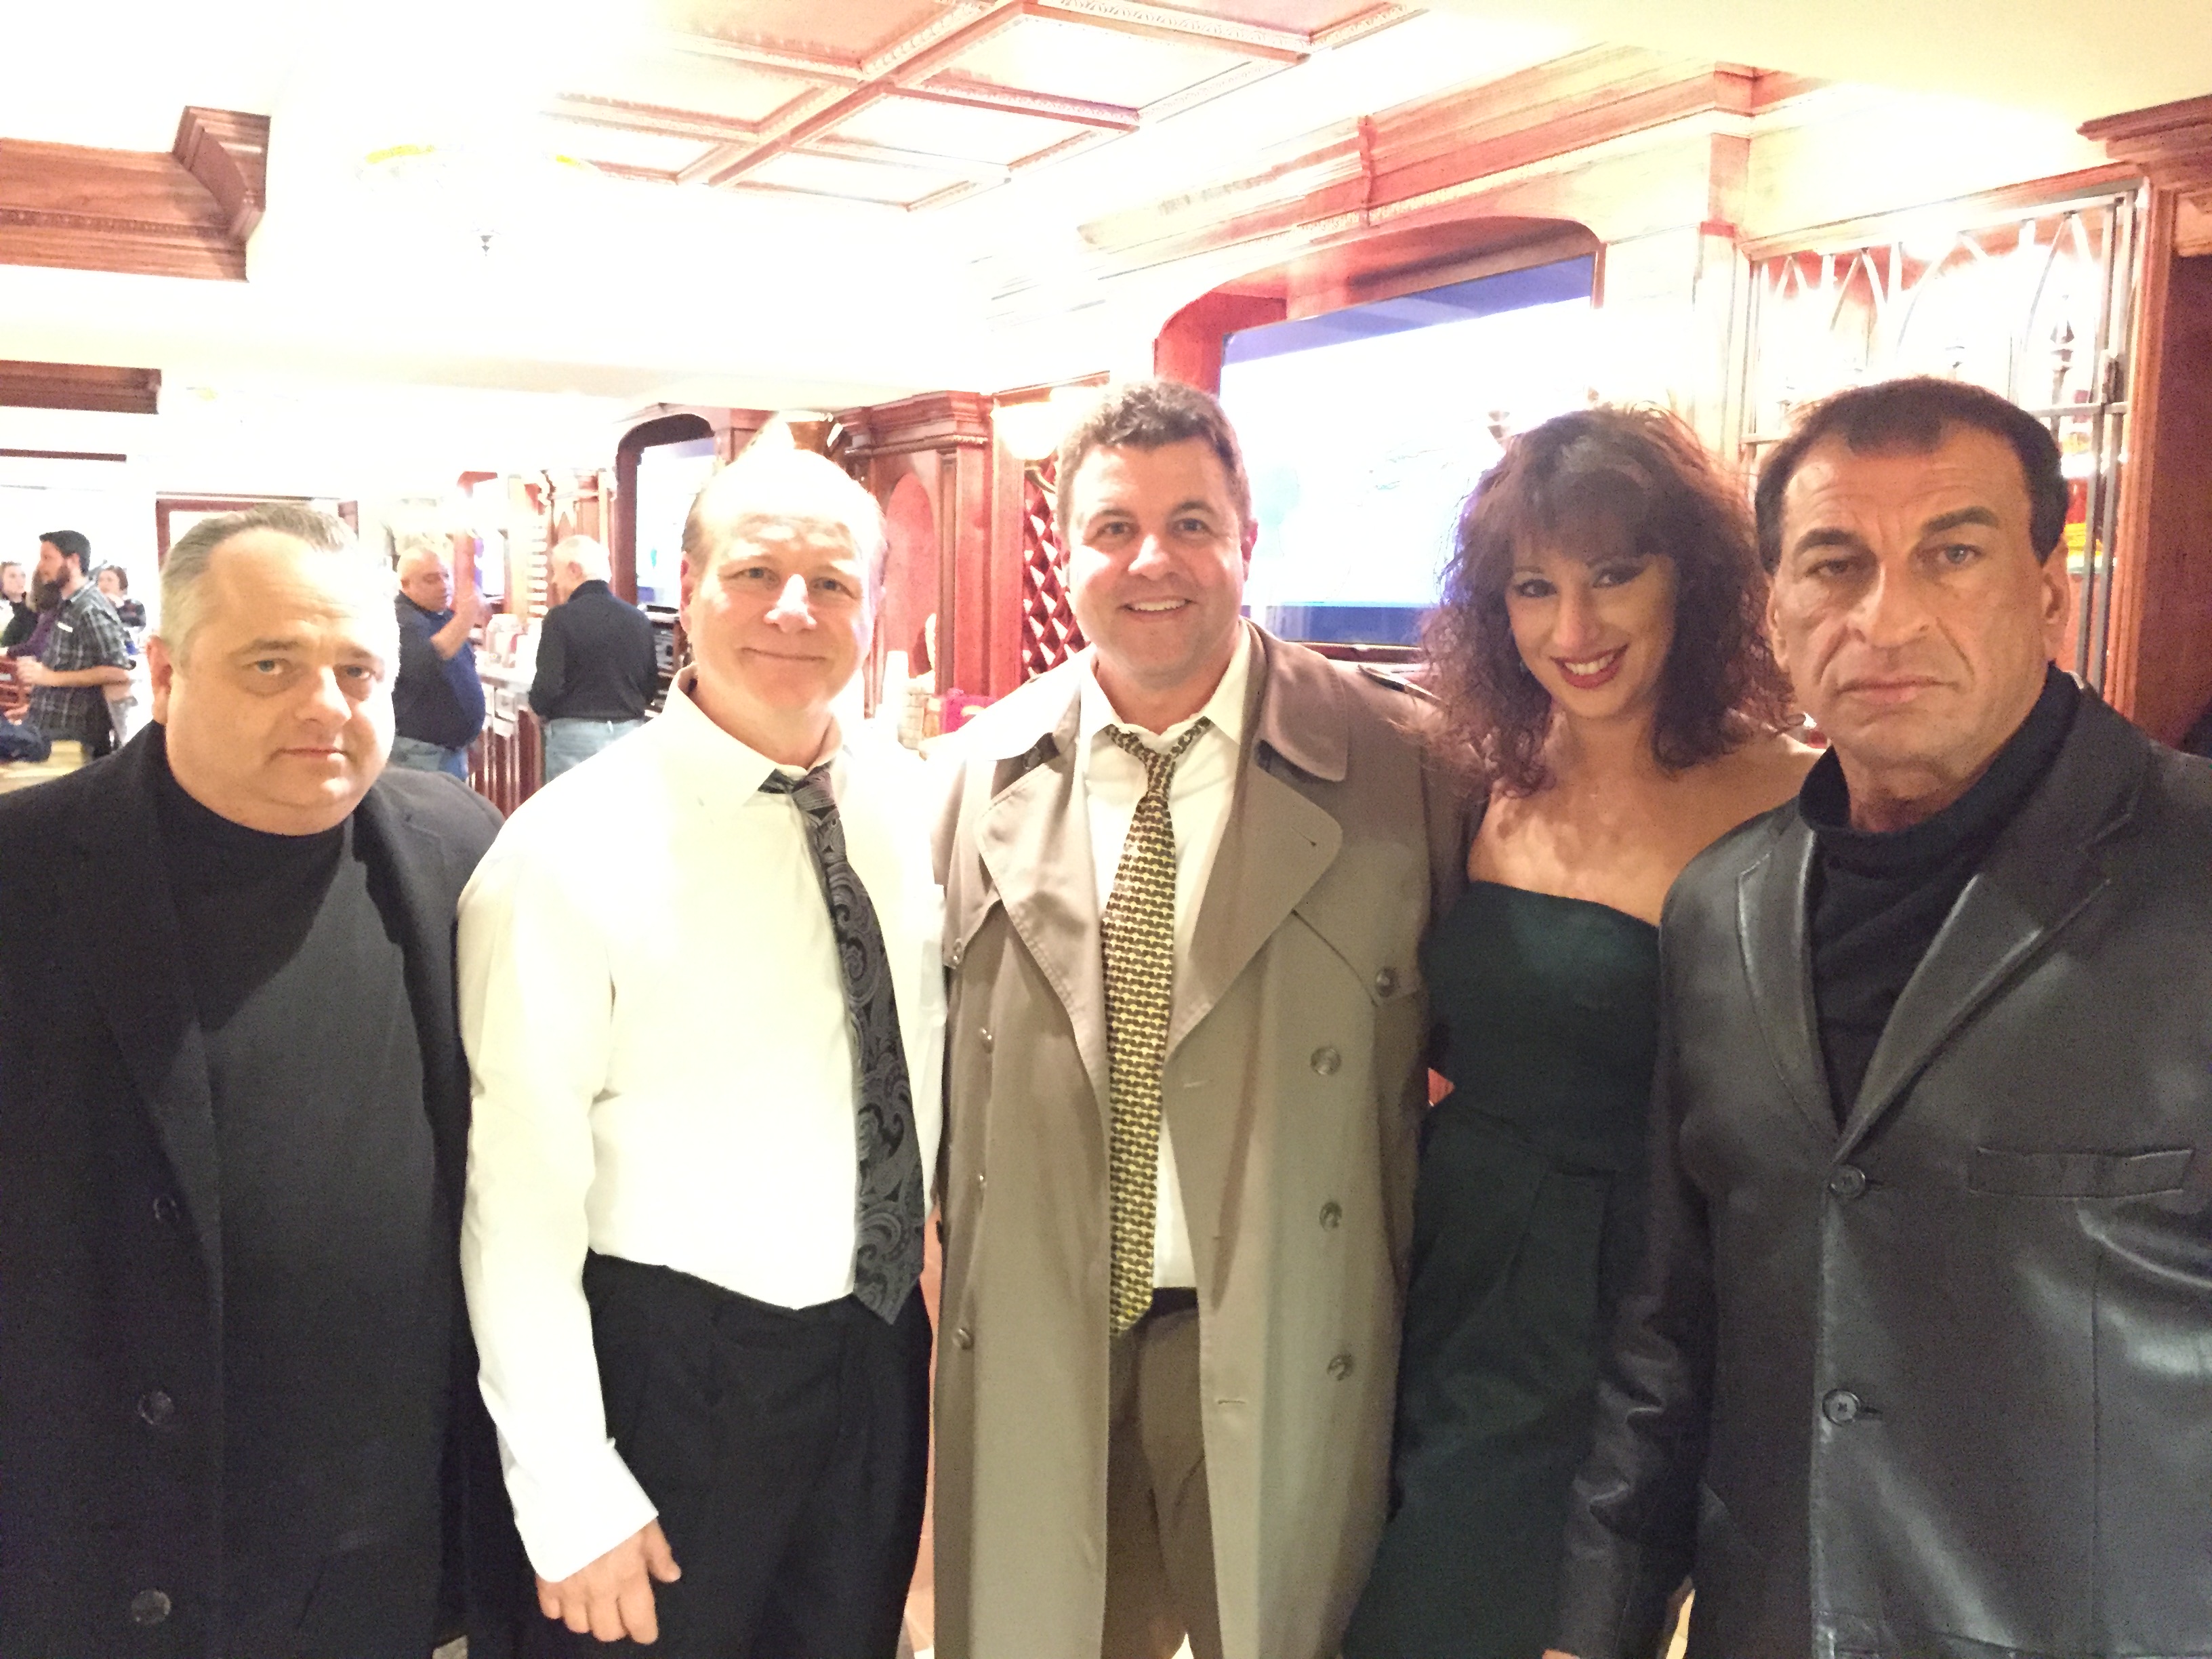 Post-show (left to right:) Writer Ray Lombard, Comedian and Actor Mike Marino, Director Brian Vernick, Laura Madsen, and Actor Peter Gaudio